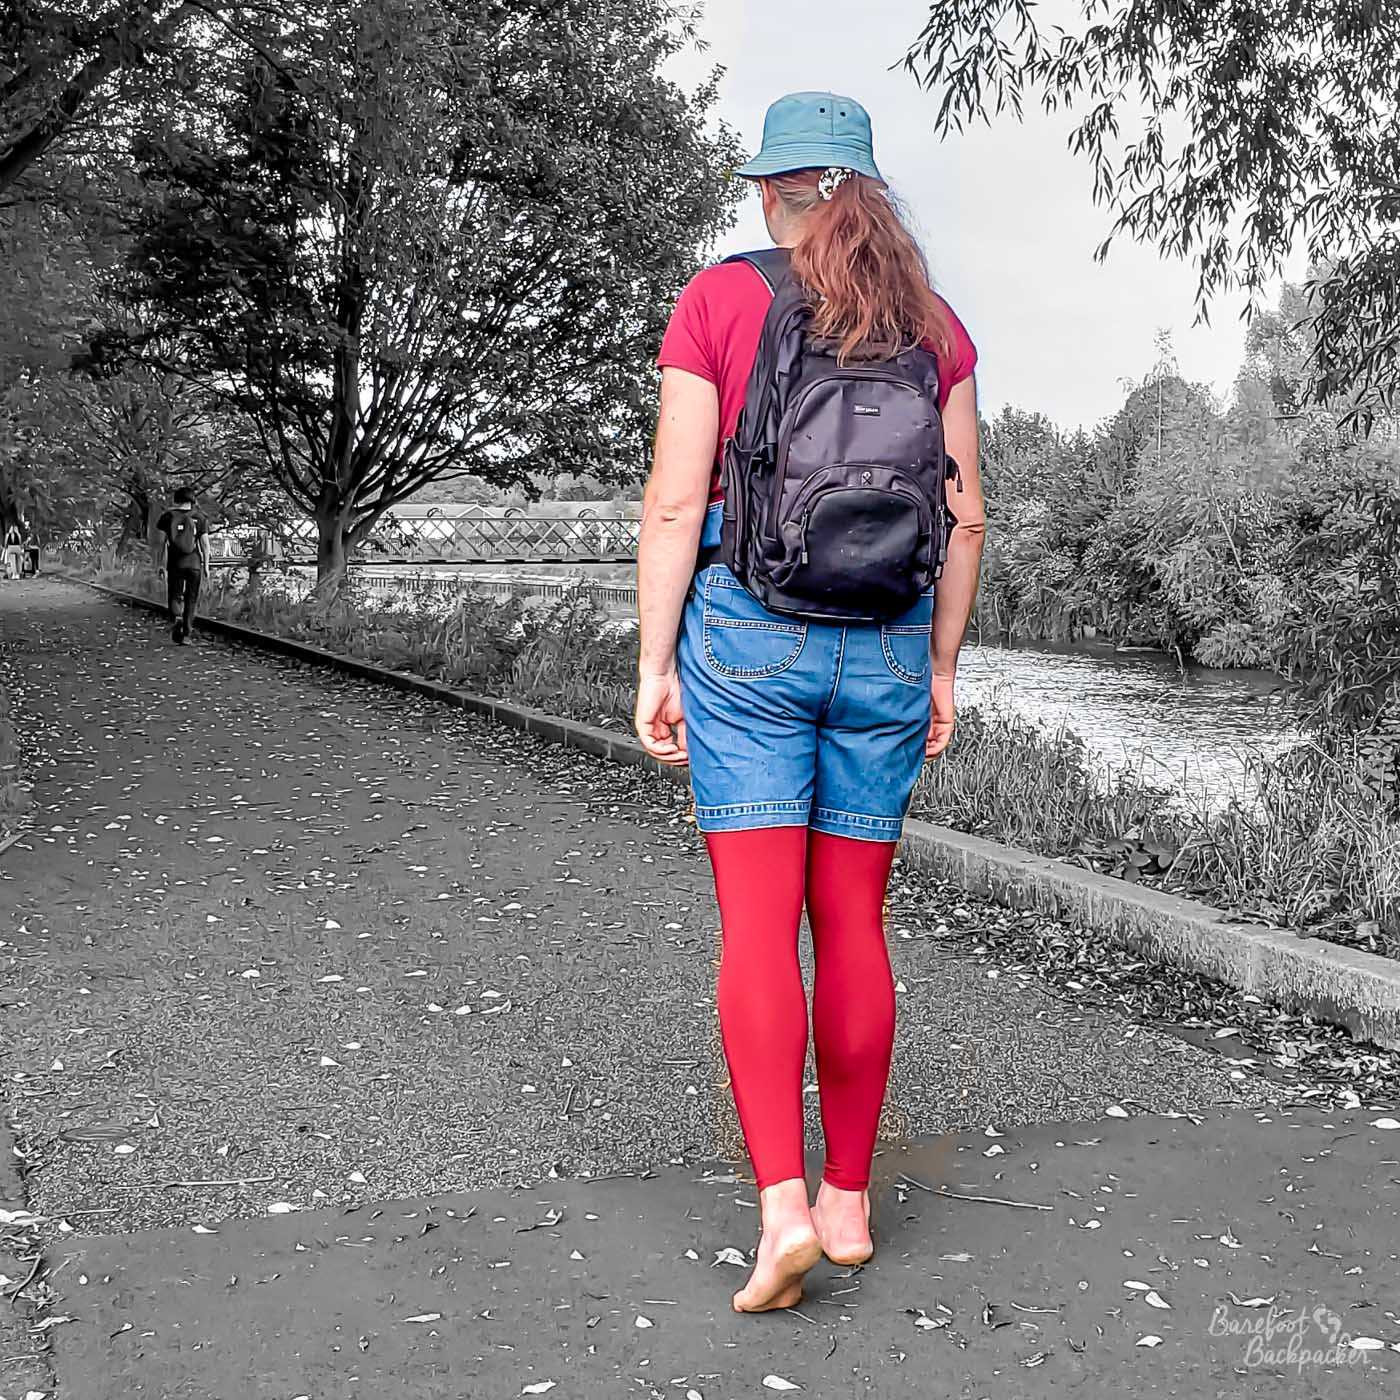 Someone, possibly a taller-than-average female, is walking away from the camera, on a solid path in a park. On the right, down a dip, is a river. In the background are trees. The person is wearing a hat, a backpack, a t-shirt, dungaree shorts, and leggings. She is barefoot, and has a ponytail. With regard to the image itself, they are in full colour (blue dungs and hat, red t-shirt and leggings), but the rest of the scenery - the trees, the path, the river, etc - has been rendered in black & white.